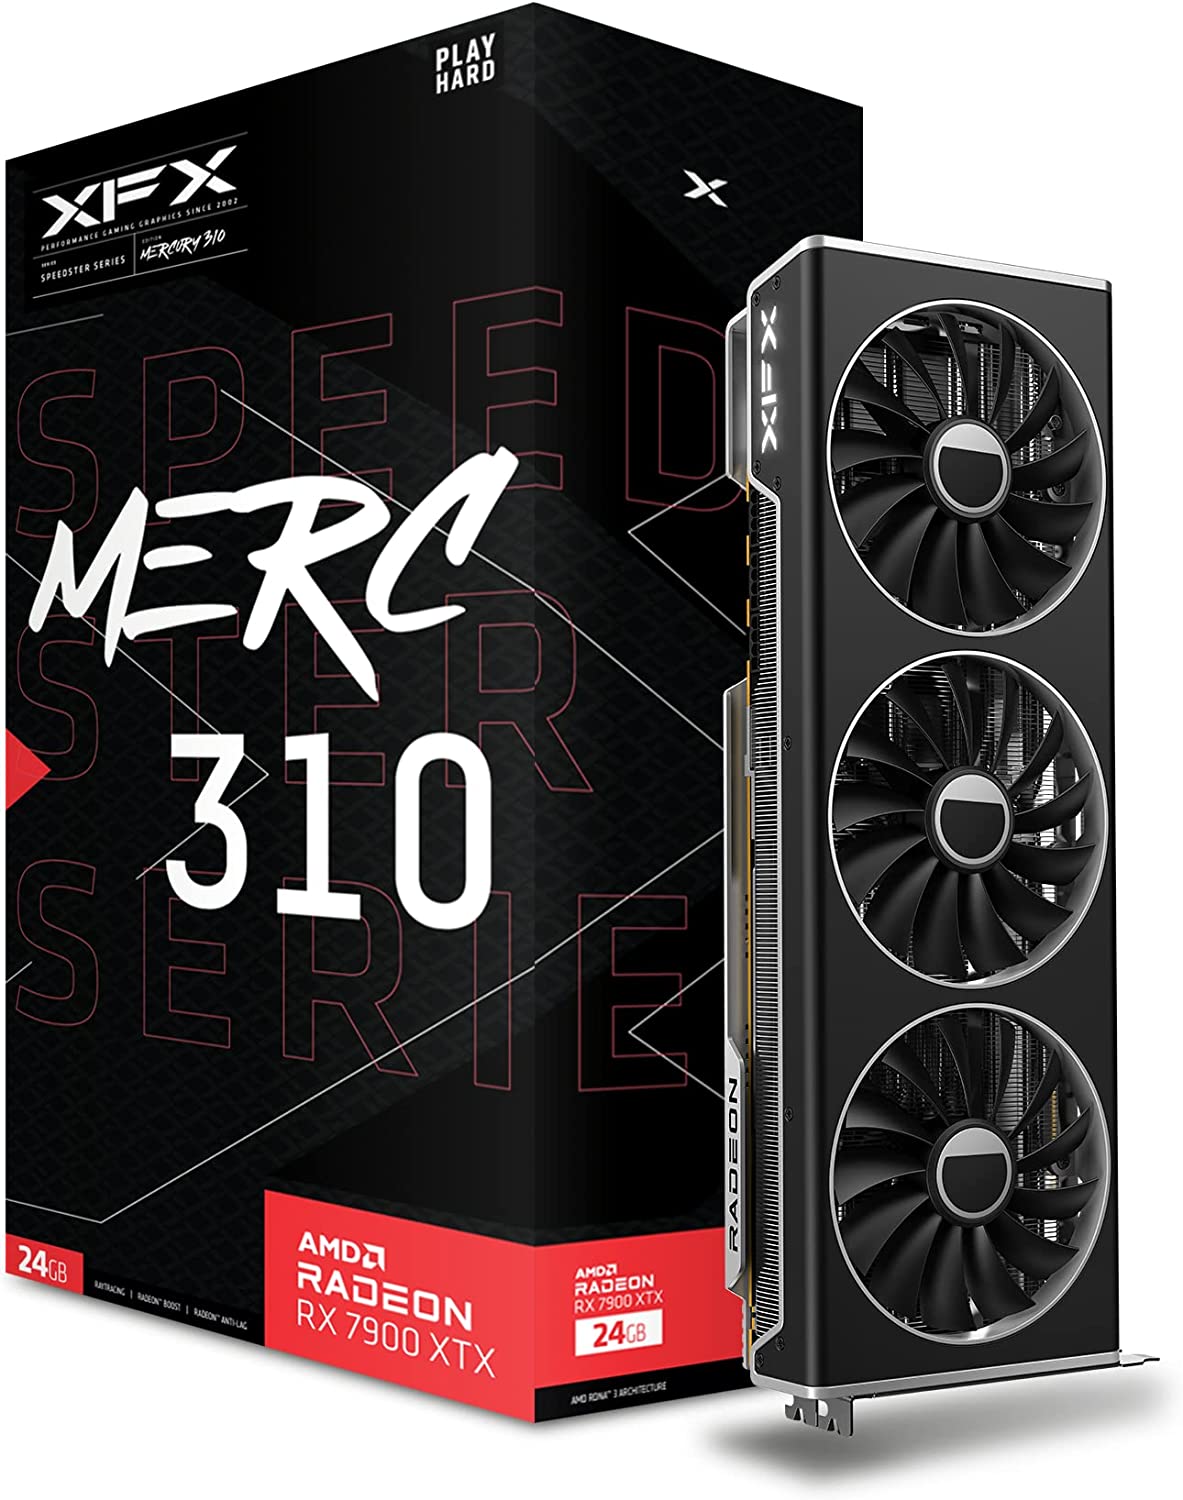 Select AMD Video Cards (RX 6800 XT, RX 7900 XT's, RX 7900 XTX's) $50 off + Free Amazon Music for 90 Days + Free Resident Evil 4 (stacks with Amazon locker promo) YMMV